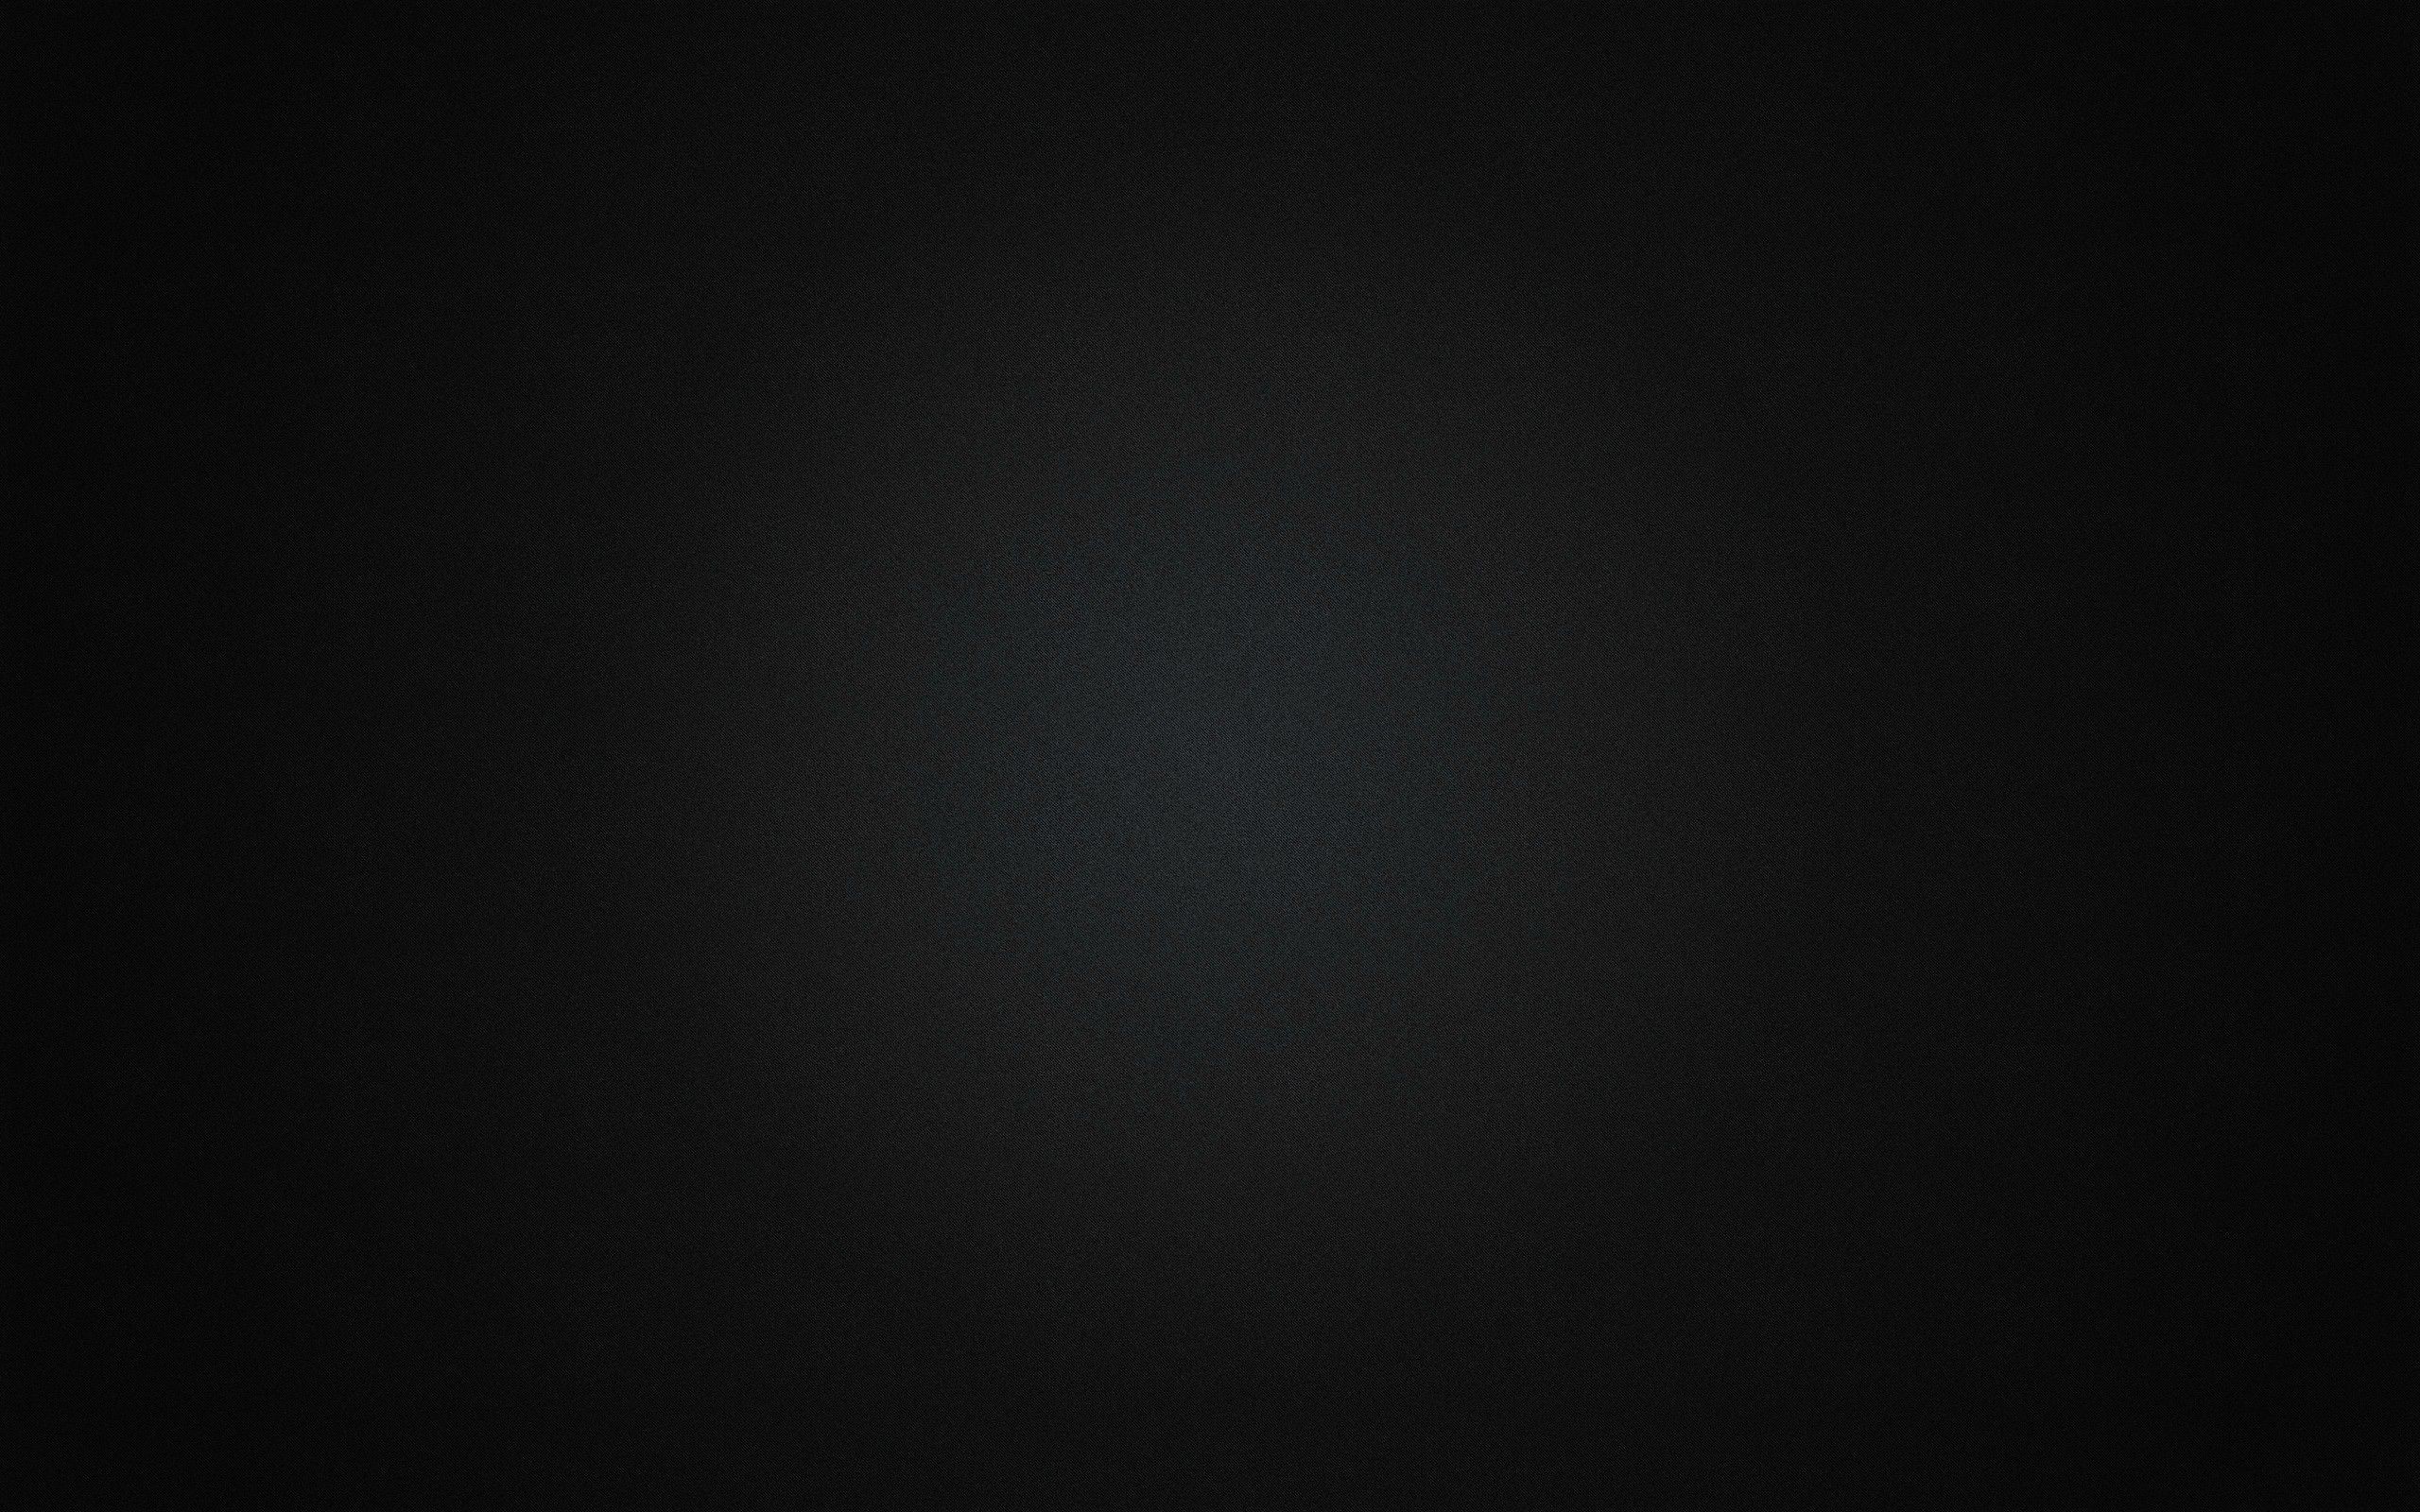 2560x1600 575 Wallpapers (All 1080p, No watermarks)